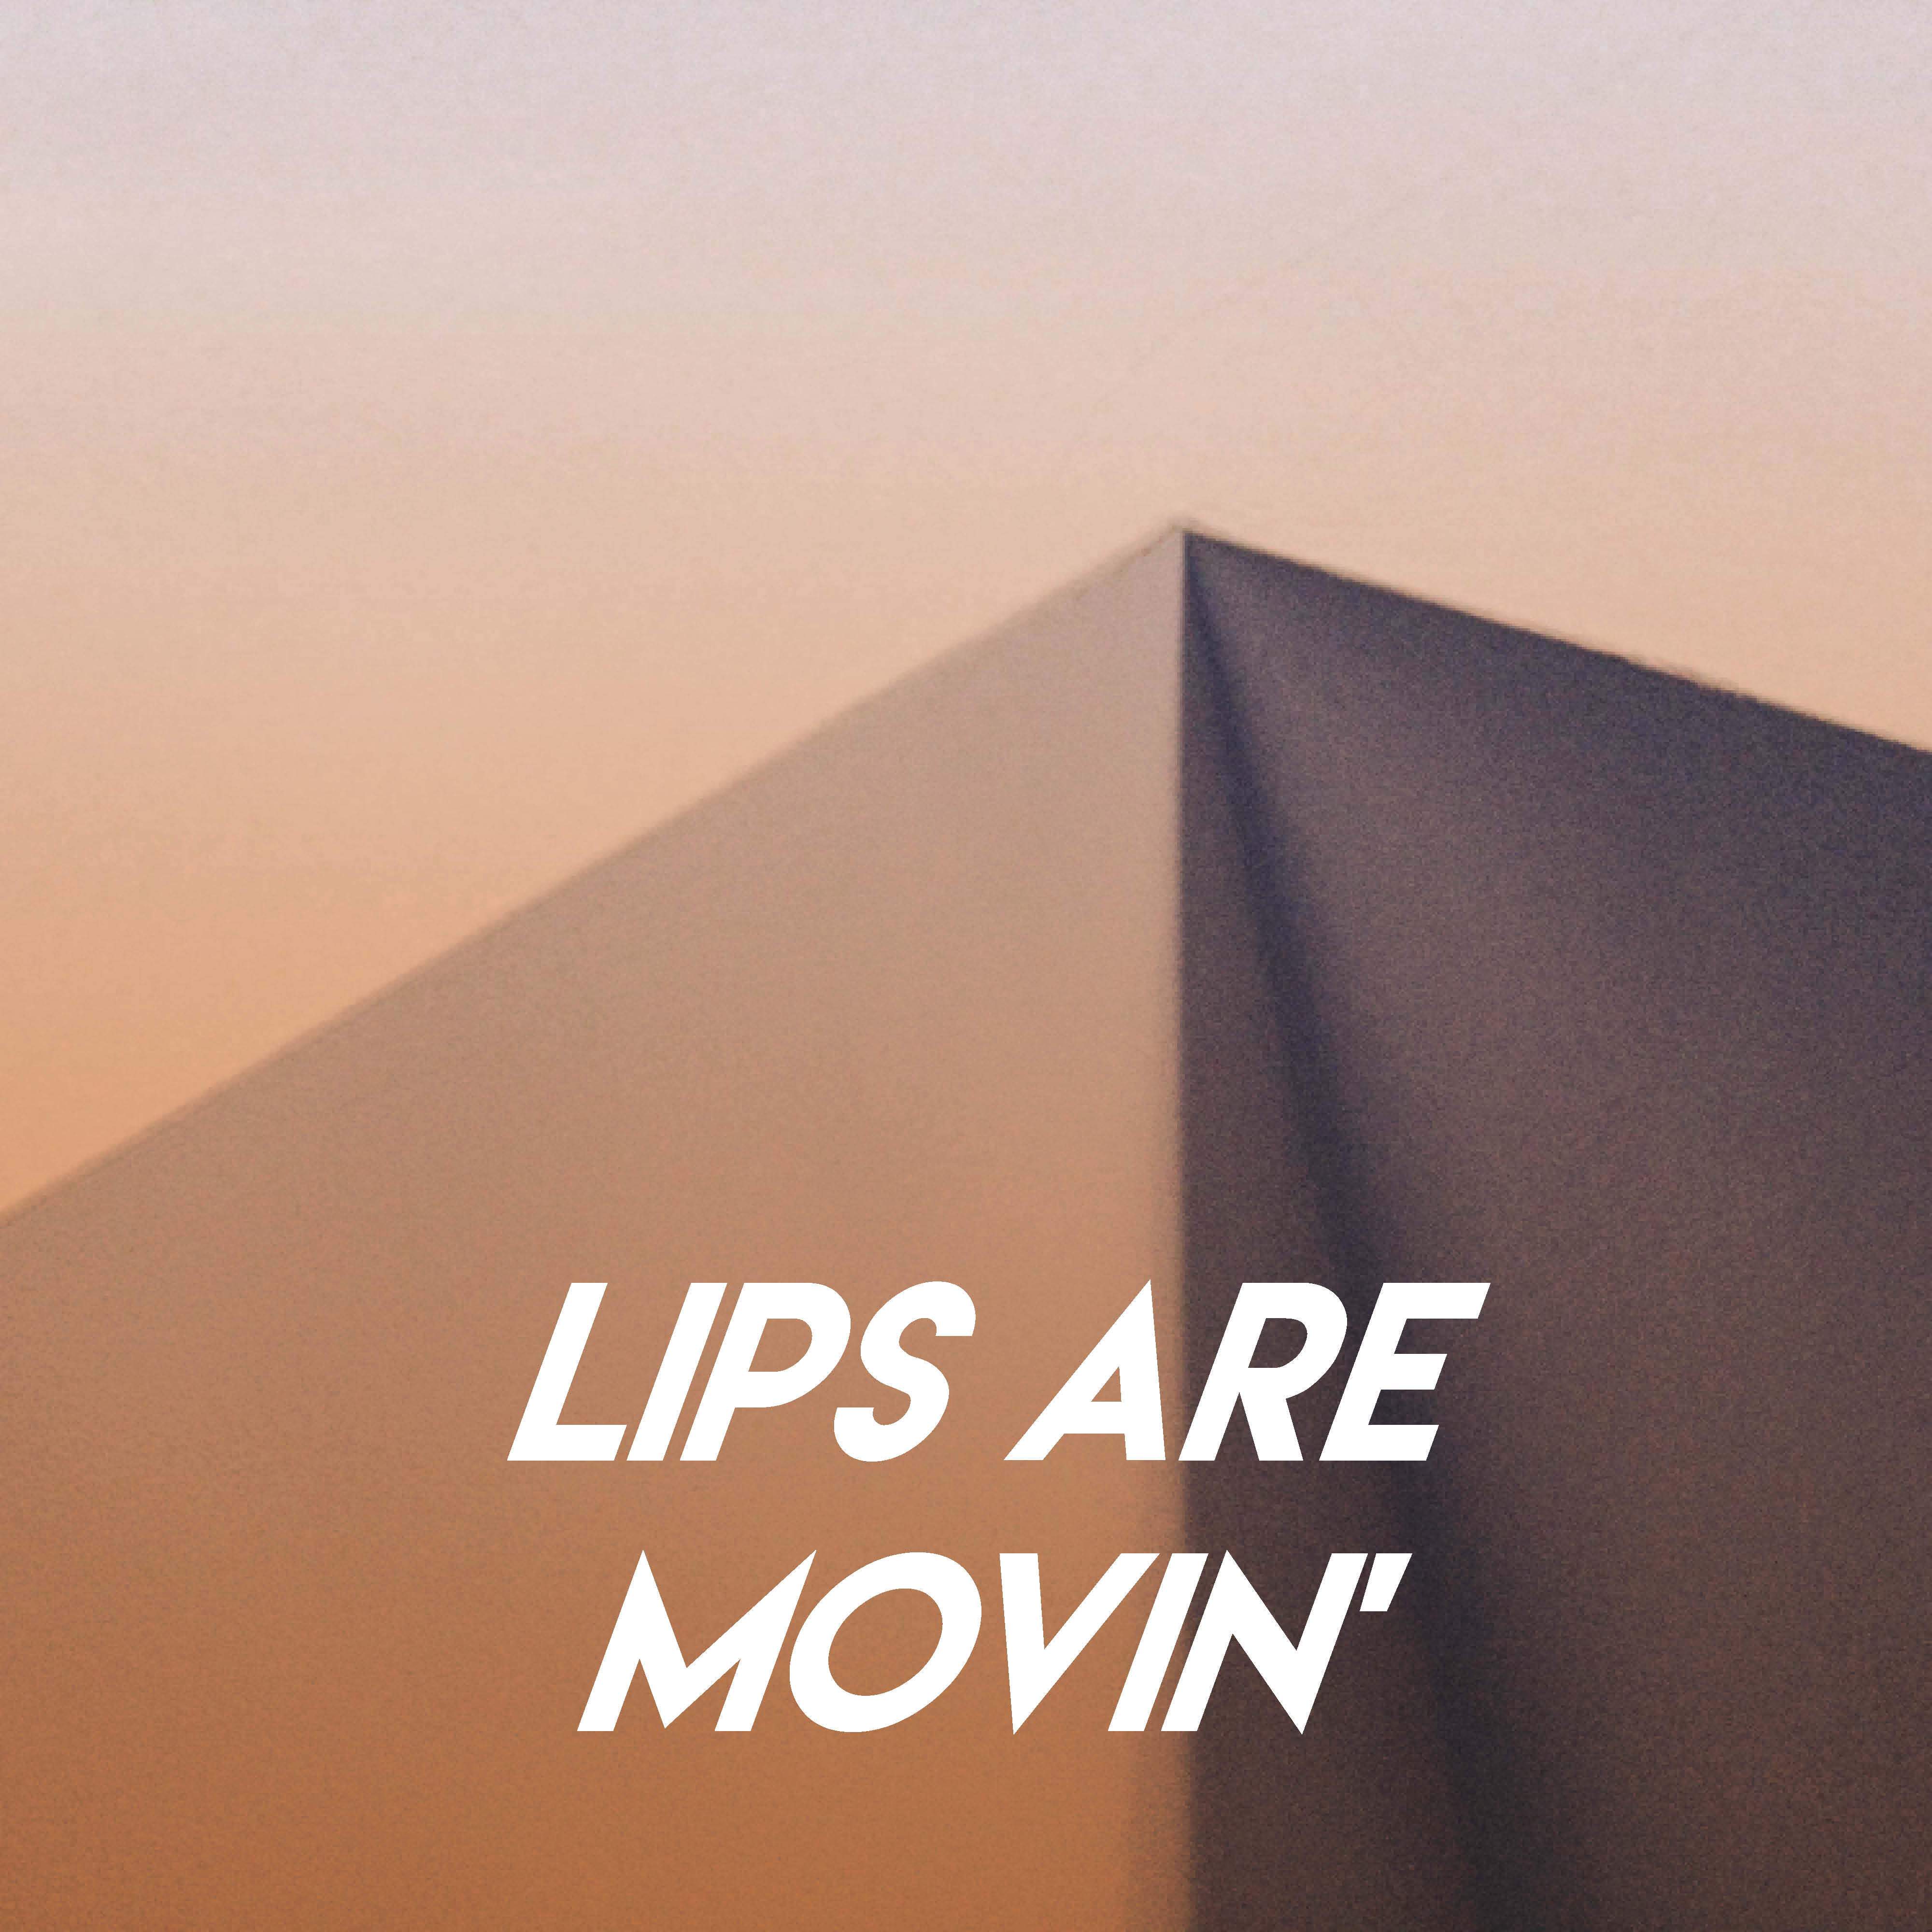 Lips Are Movin'